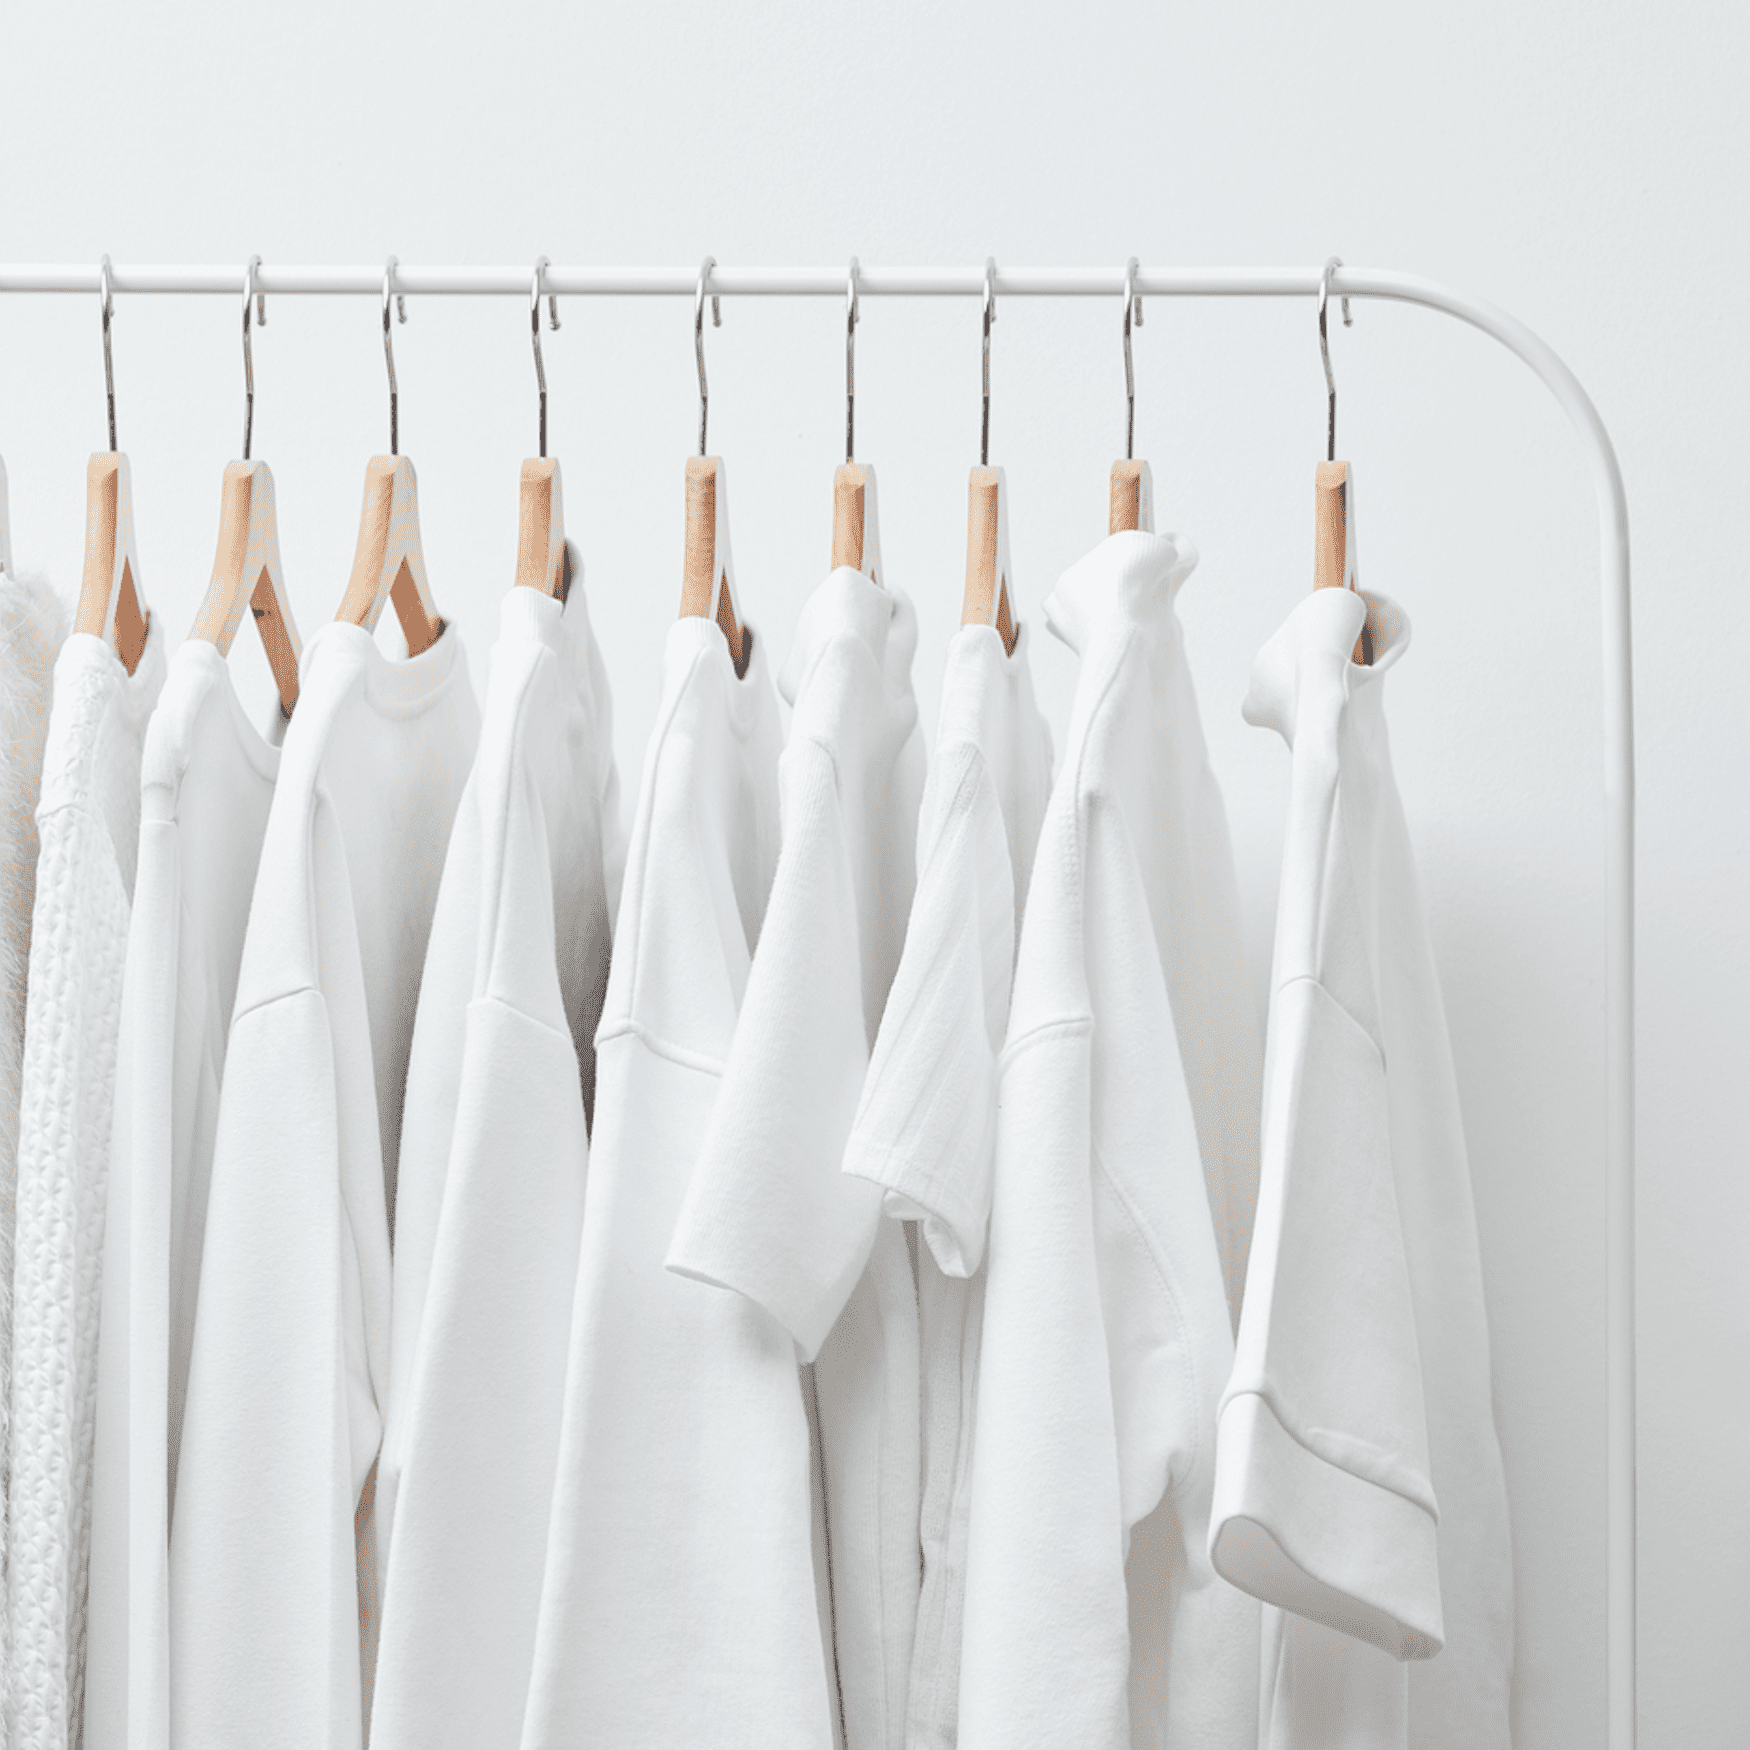 https://www.ritdye.com/wp-content/uploads/2020/11/white_clothes_sq.png